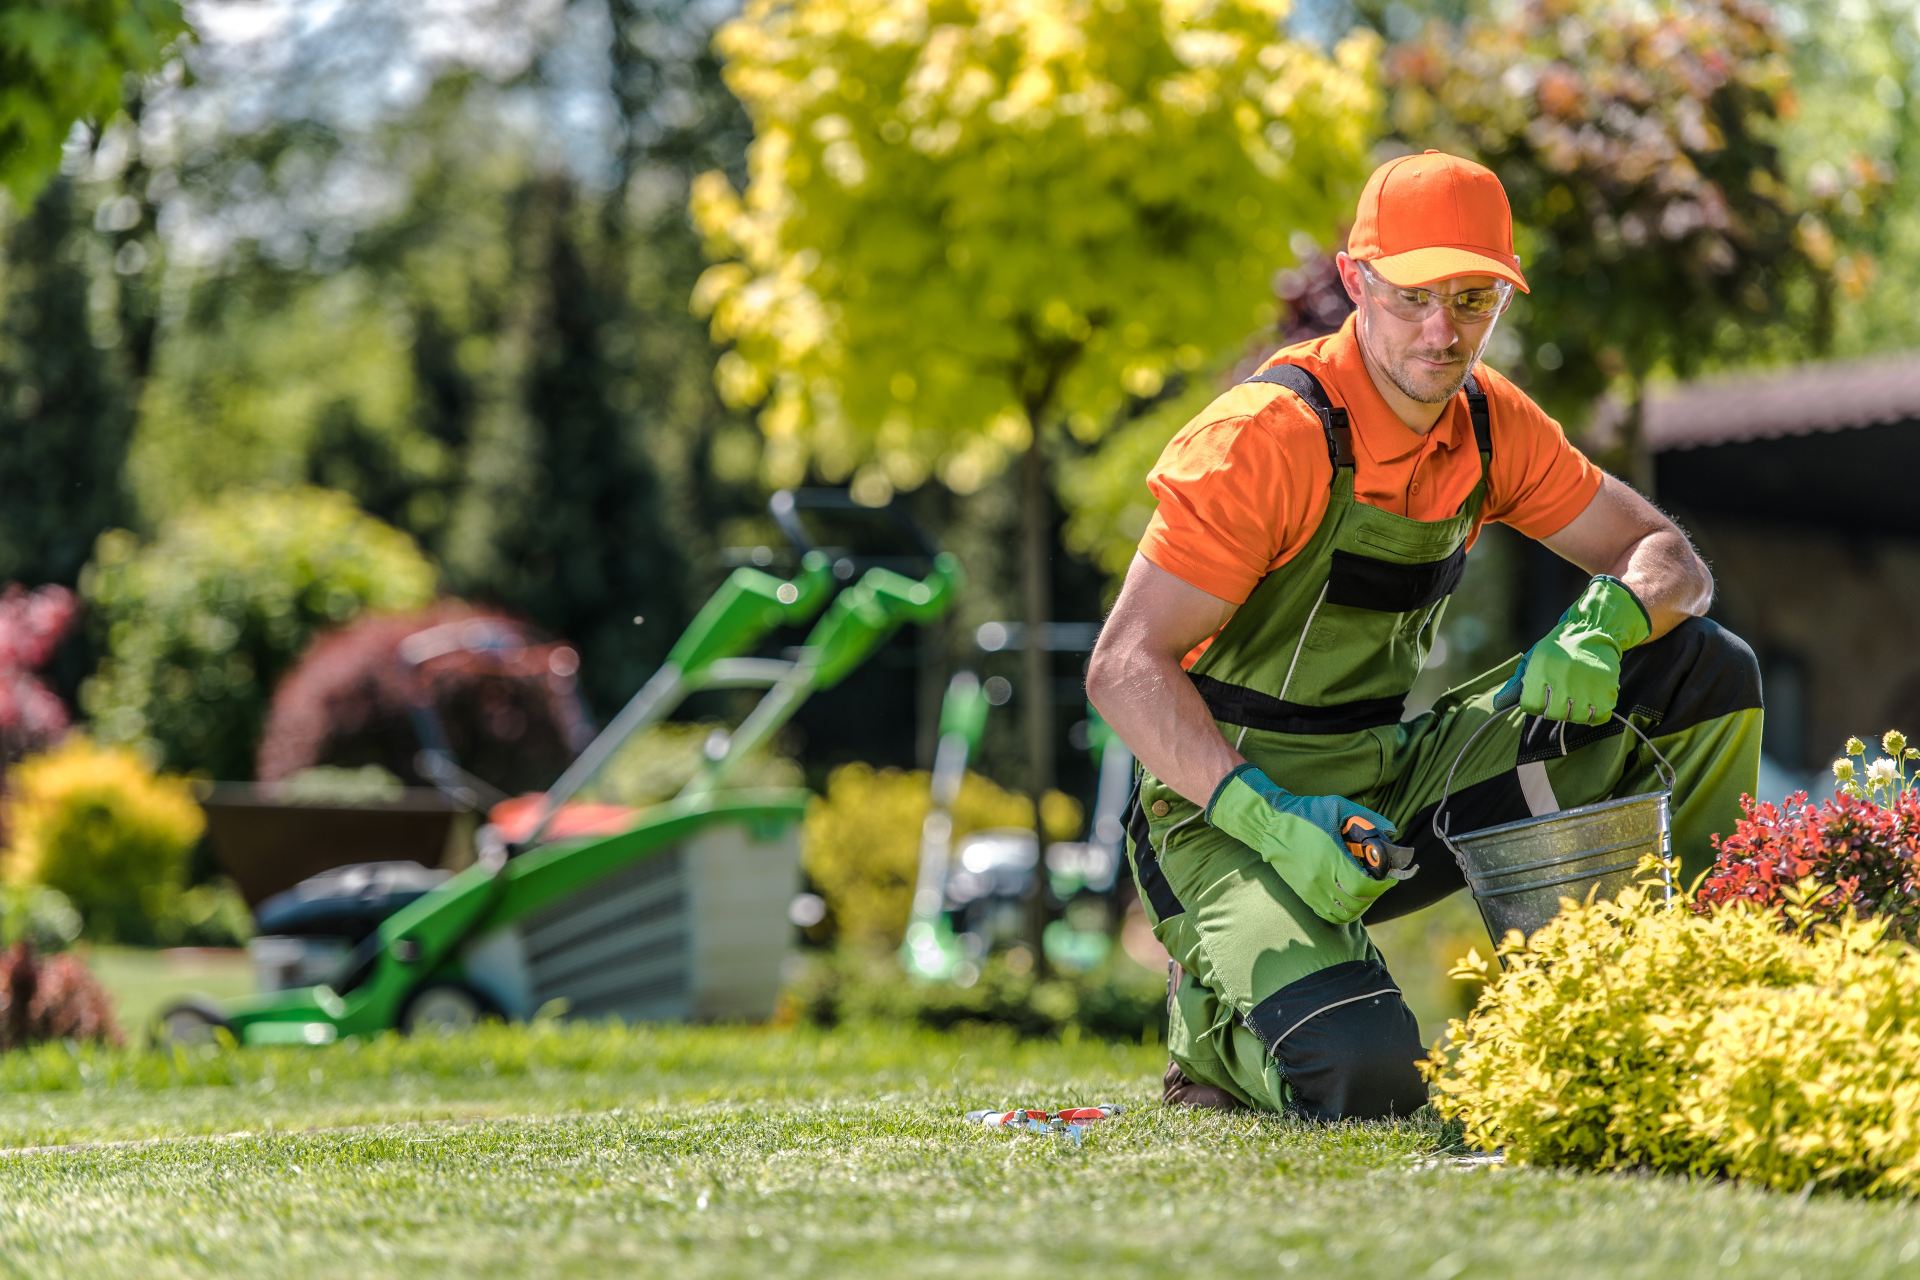 How to write an effective landscaping business plan | Yelp for Business